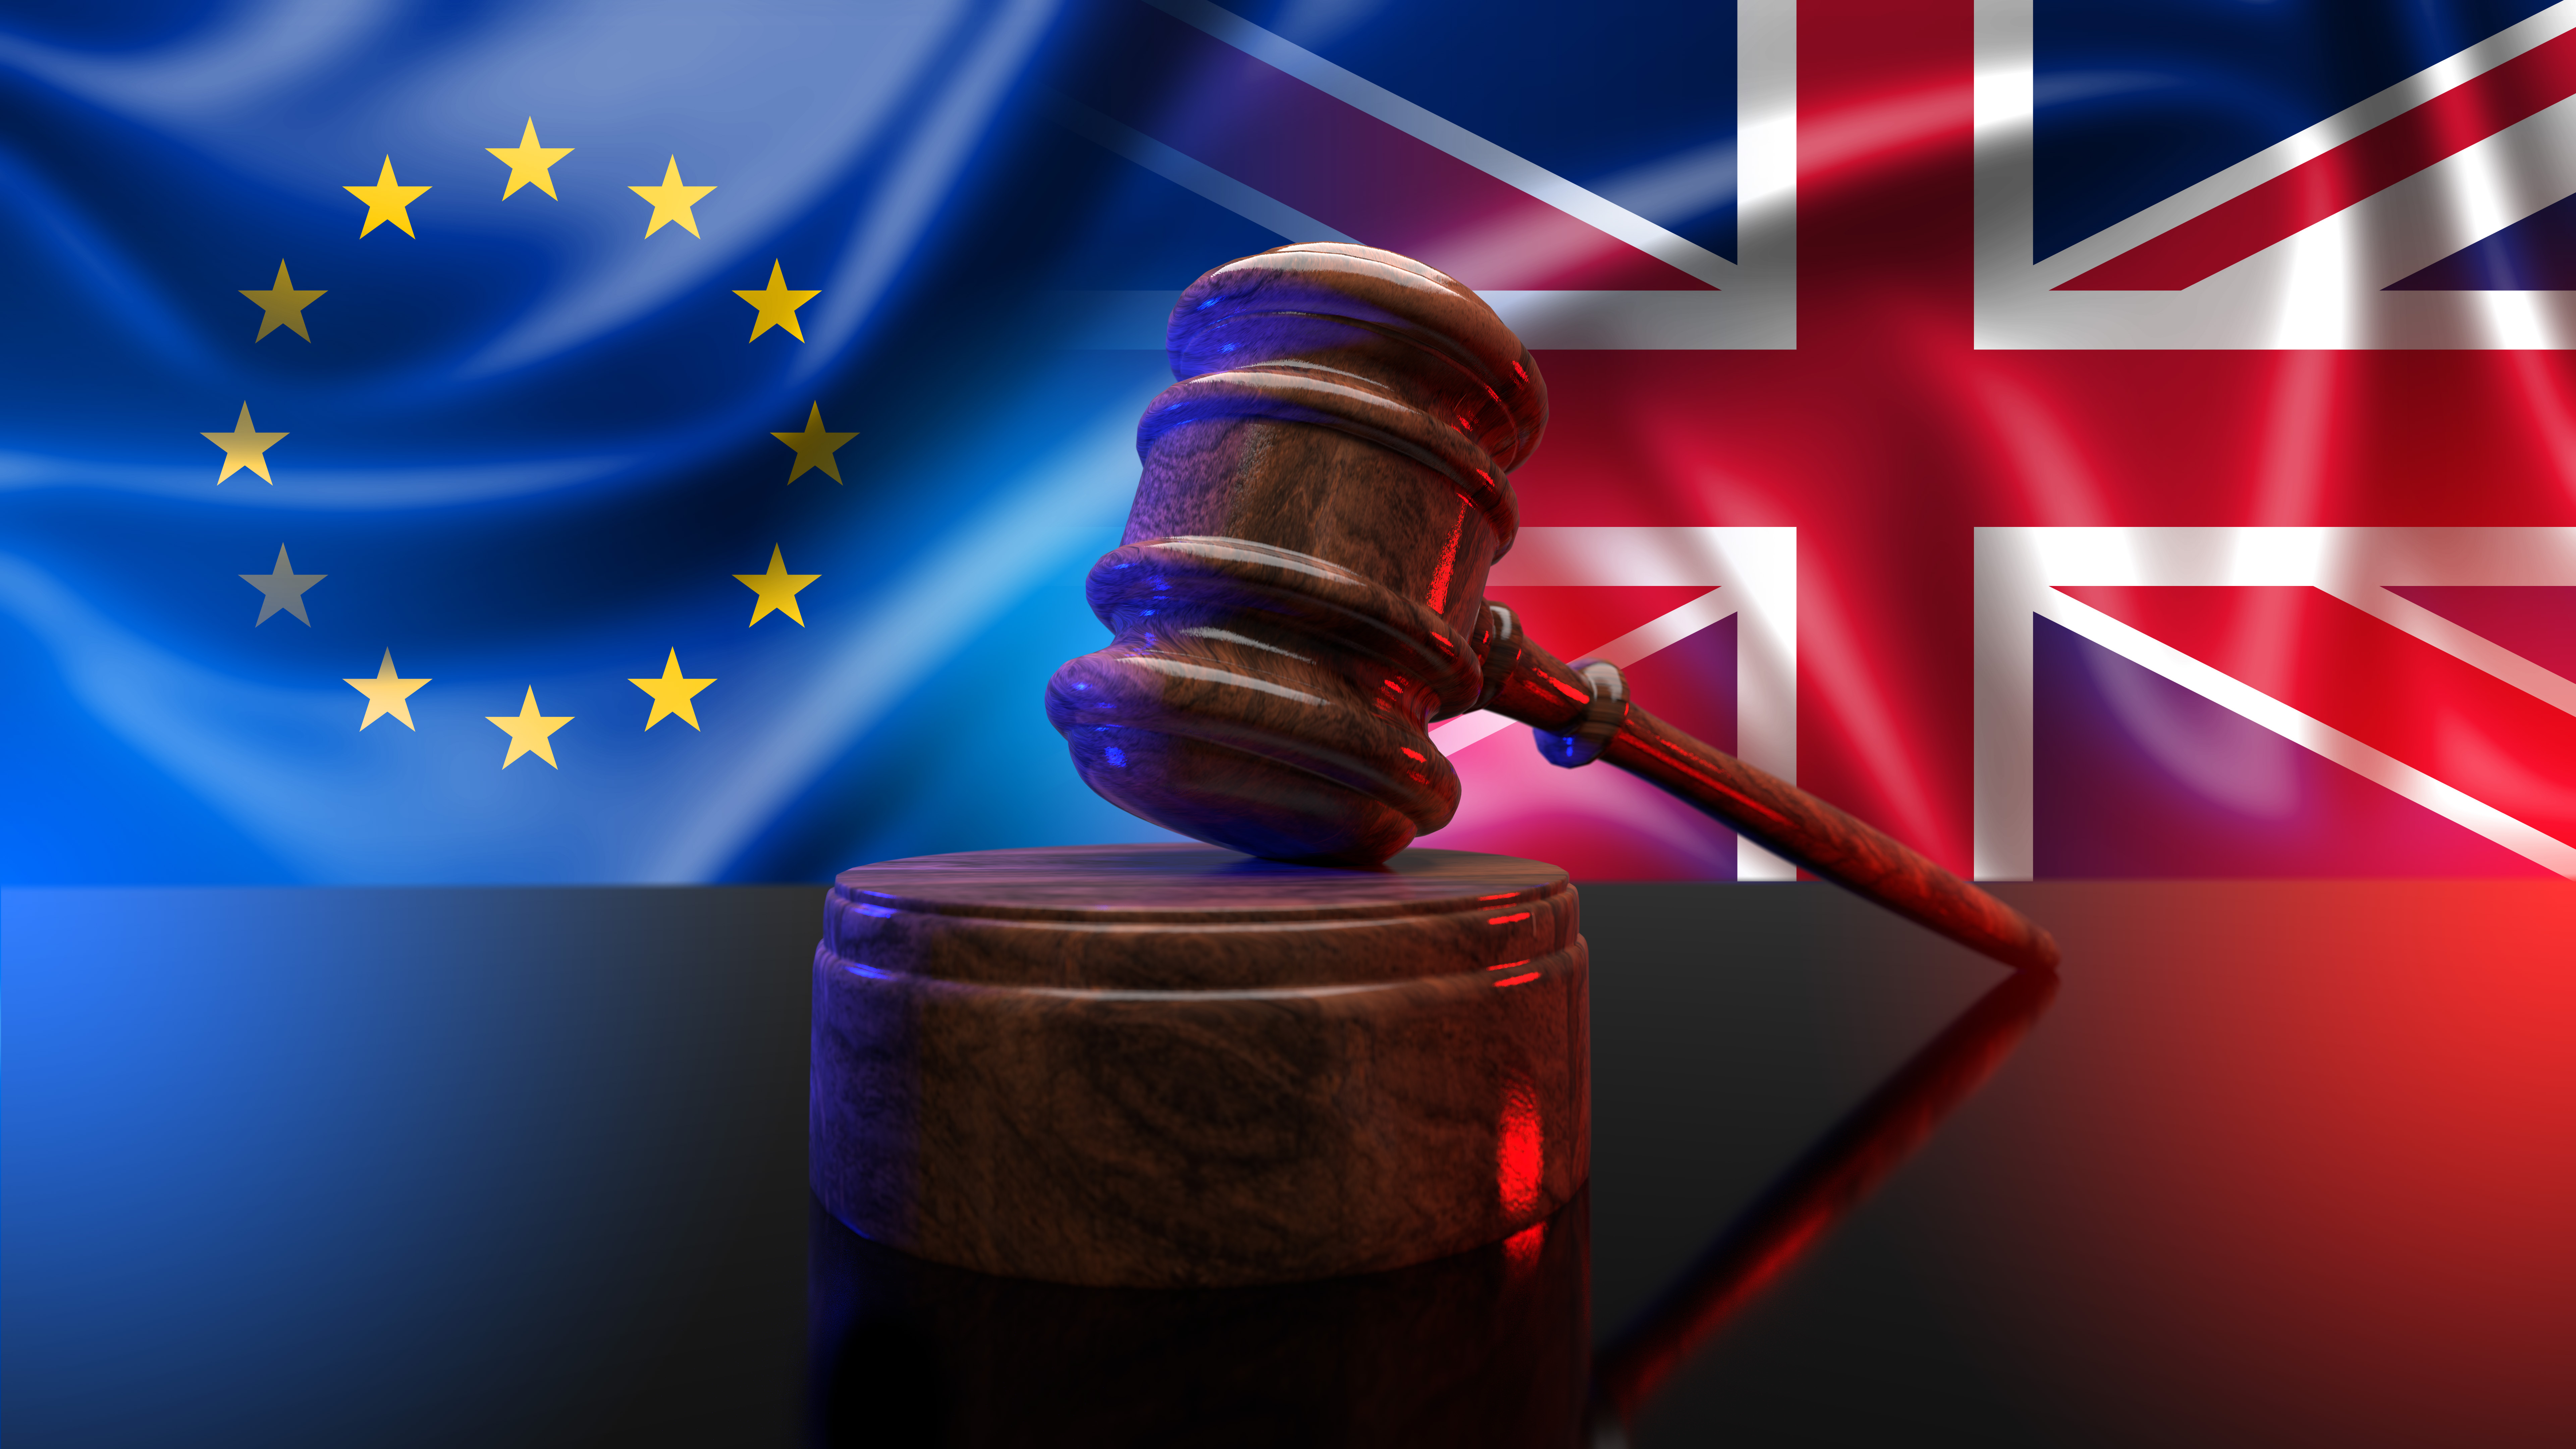 Cooperation in criminal proceedings after Brexit between European Union and the UK